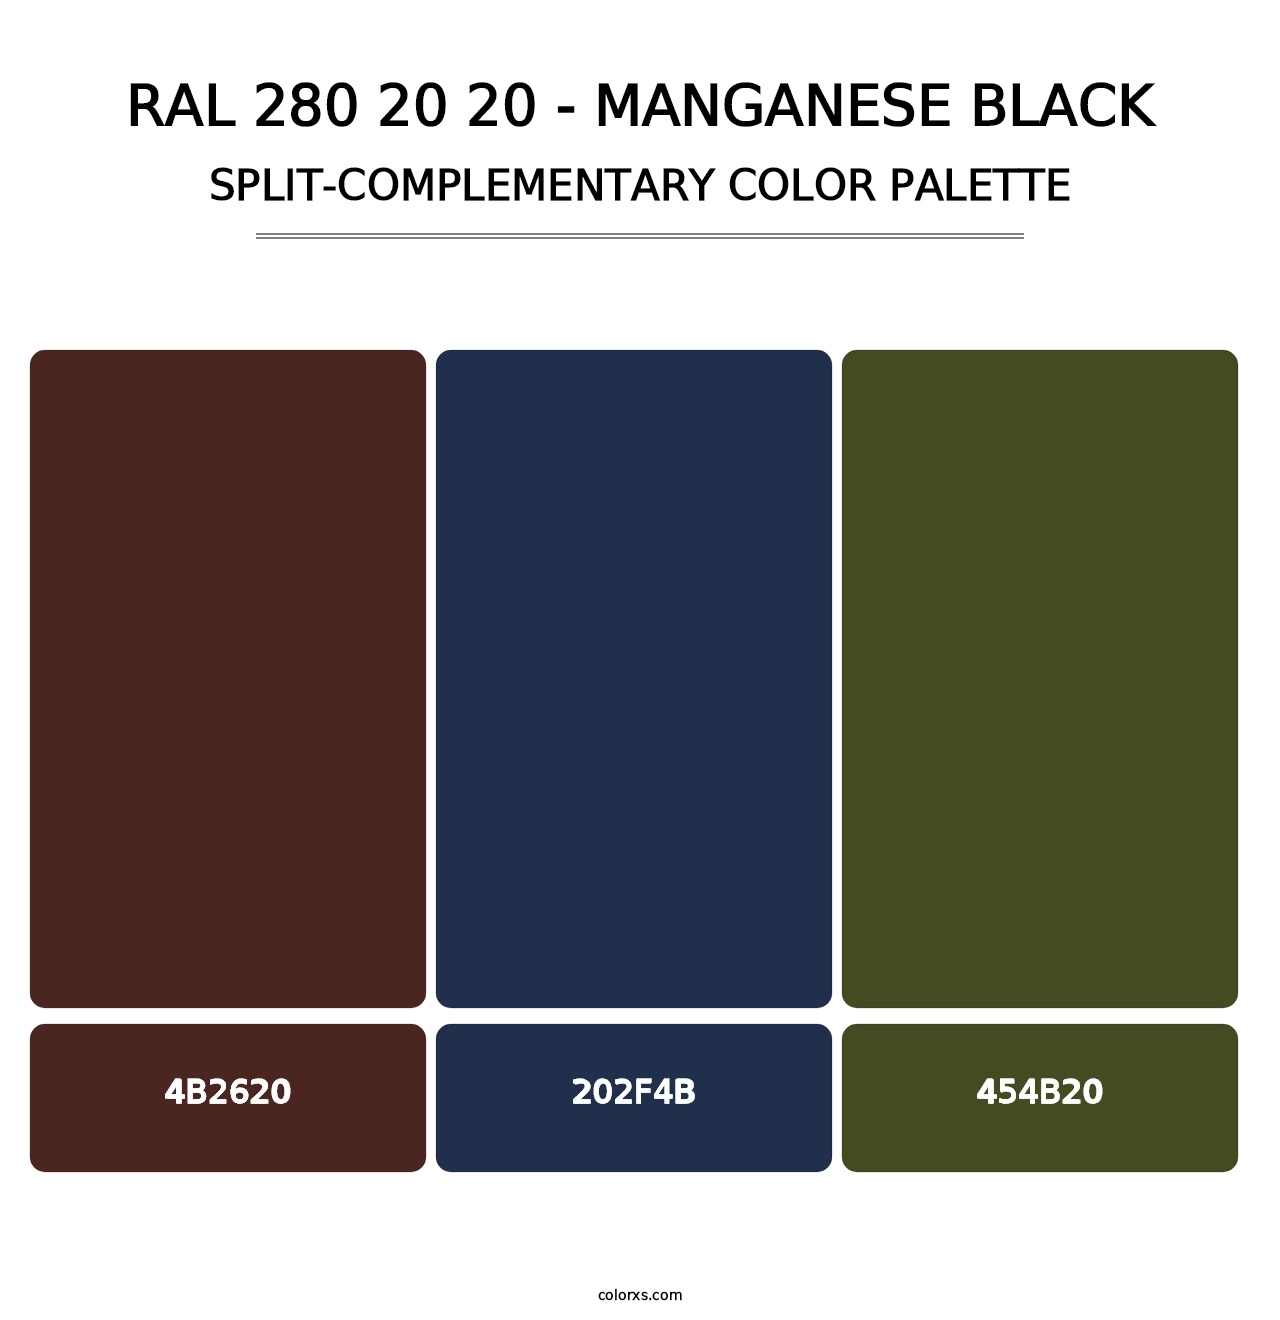 RAL 280 20 20 - Manganese Black - Split-Complementary Color Palette